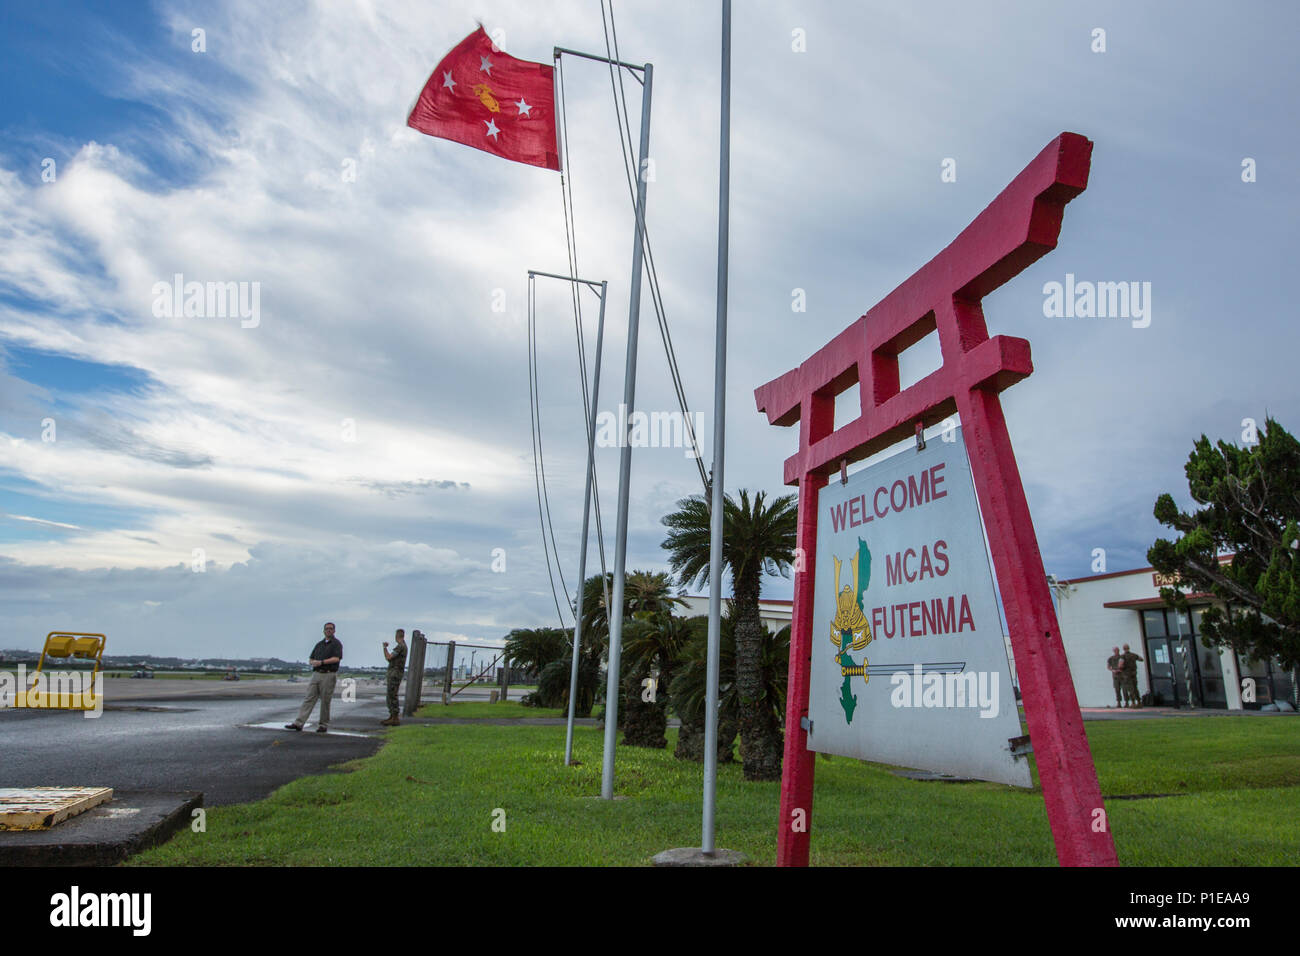 The official flag of the Commandant of the Marine Corps flies at Marine Corps Air Station Futenma, Okinawa, Japan, Oct. 14, 2016. Commandant of the Marine Corps Gen. Robert B. Neller visited Okinawa to tour facilities and meet with Marines. (U.S. Marine Corps photo by Cpl. Samantha K. Braun) Stock Photo